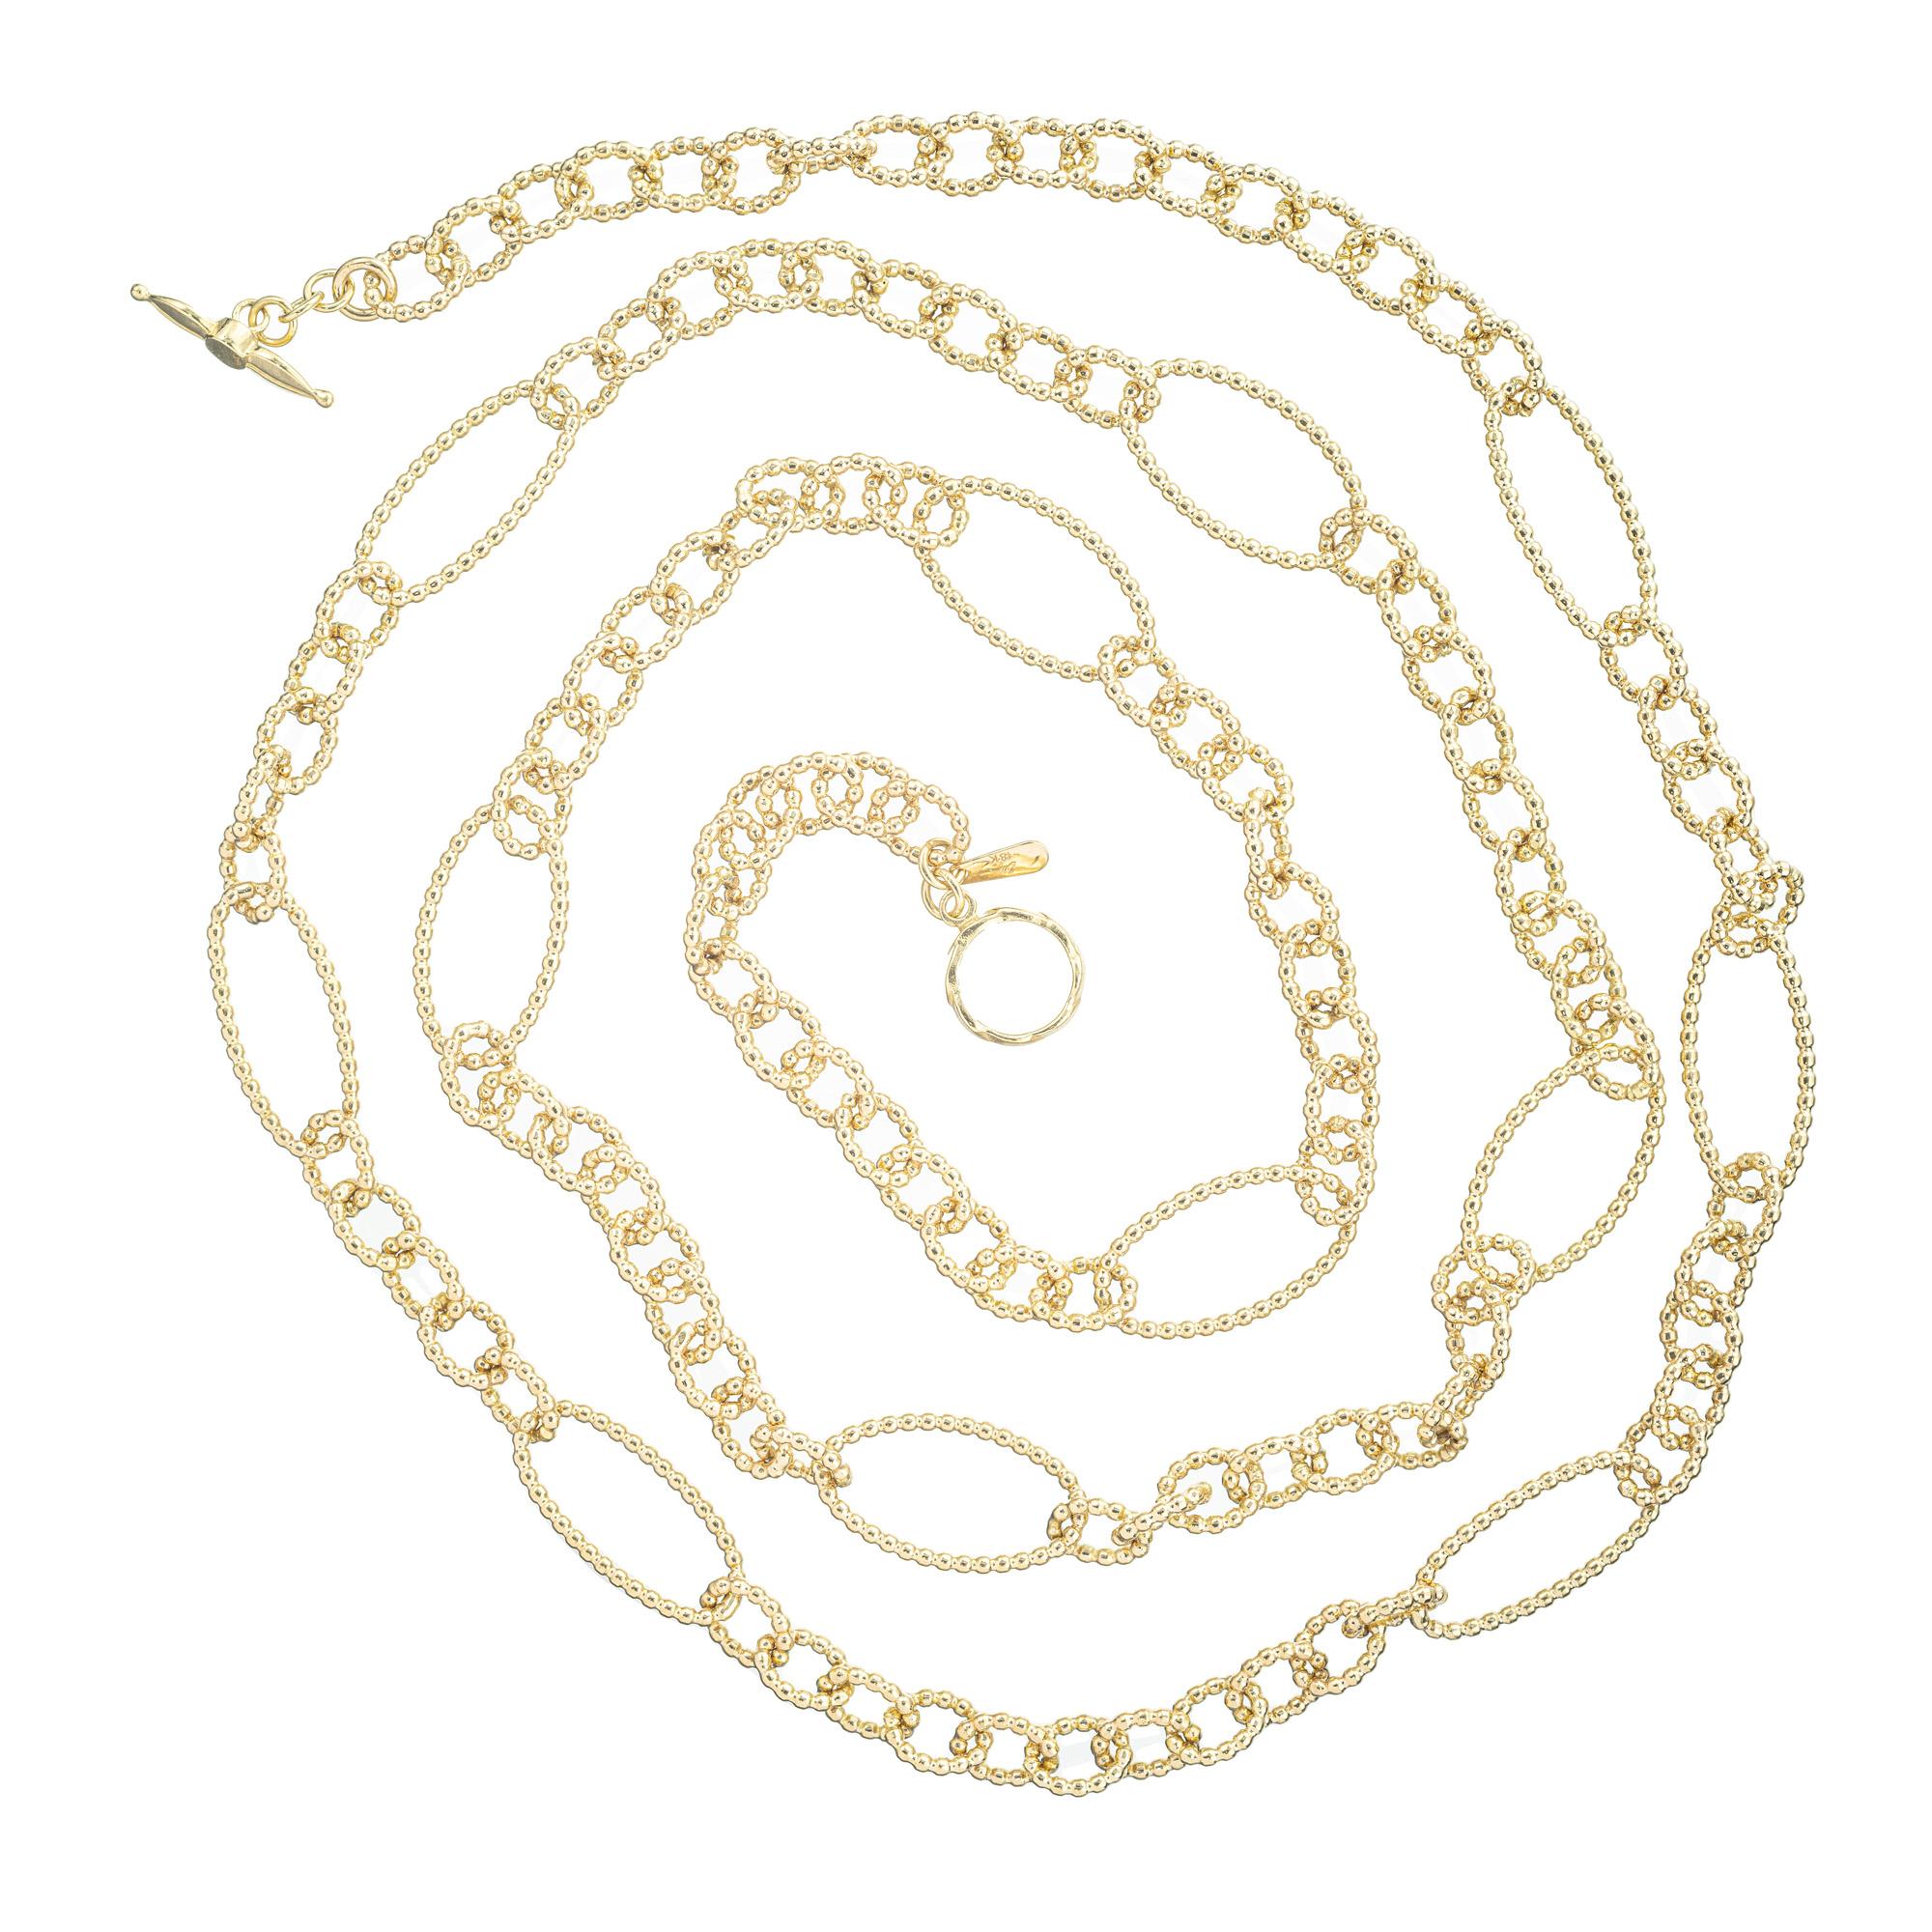 Custom made 36 inches long, 18k Yellow Gold Beaded Style Link Necklace. The beaded corrugated style links create a captivating pattern that adds a touch of style. The small oval links alternate with large oval links. Each link is carefully crafted